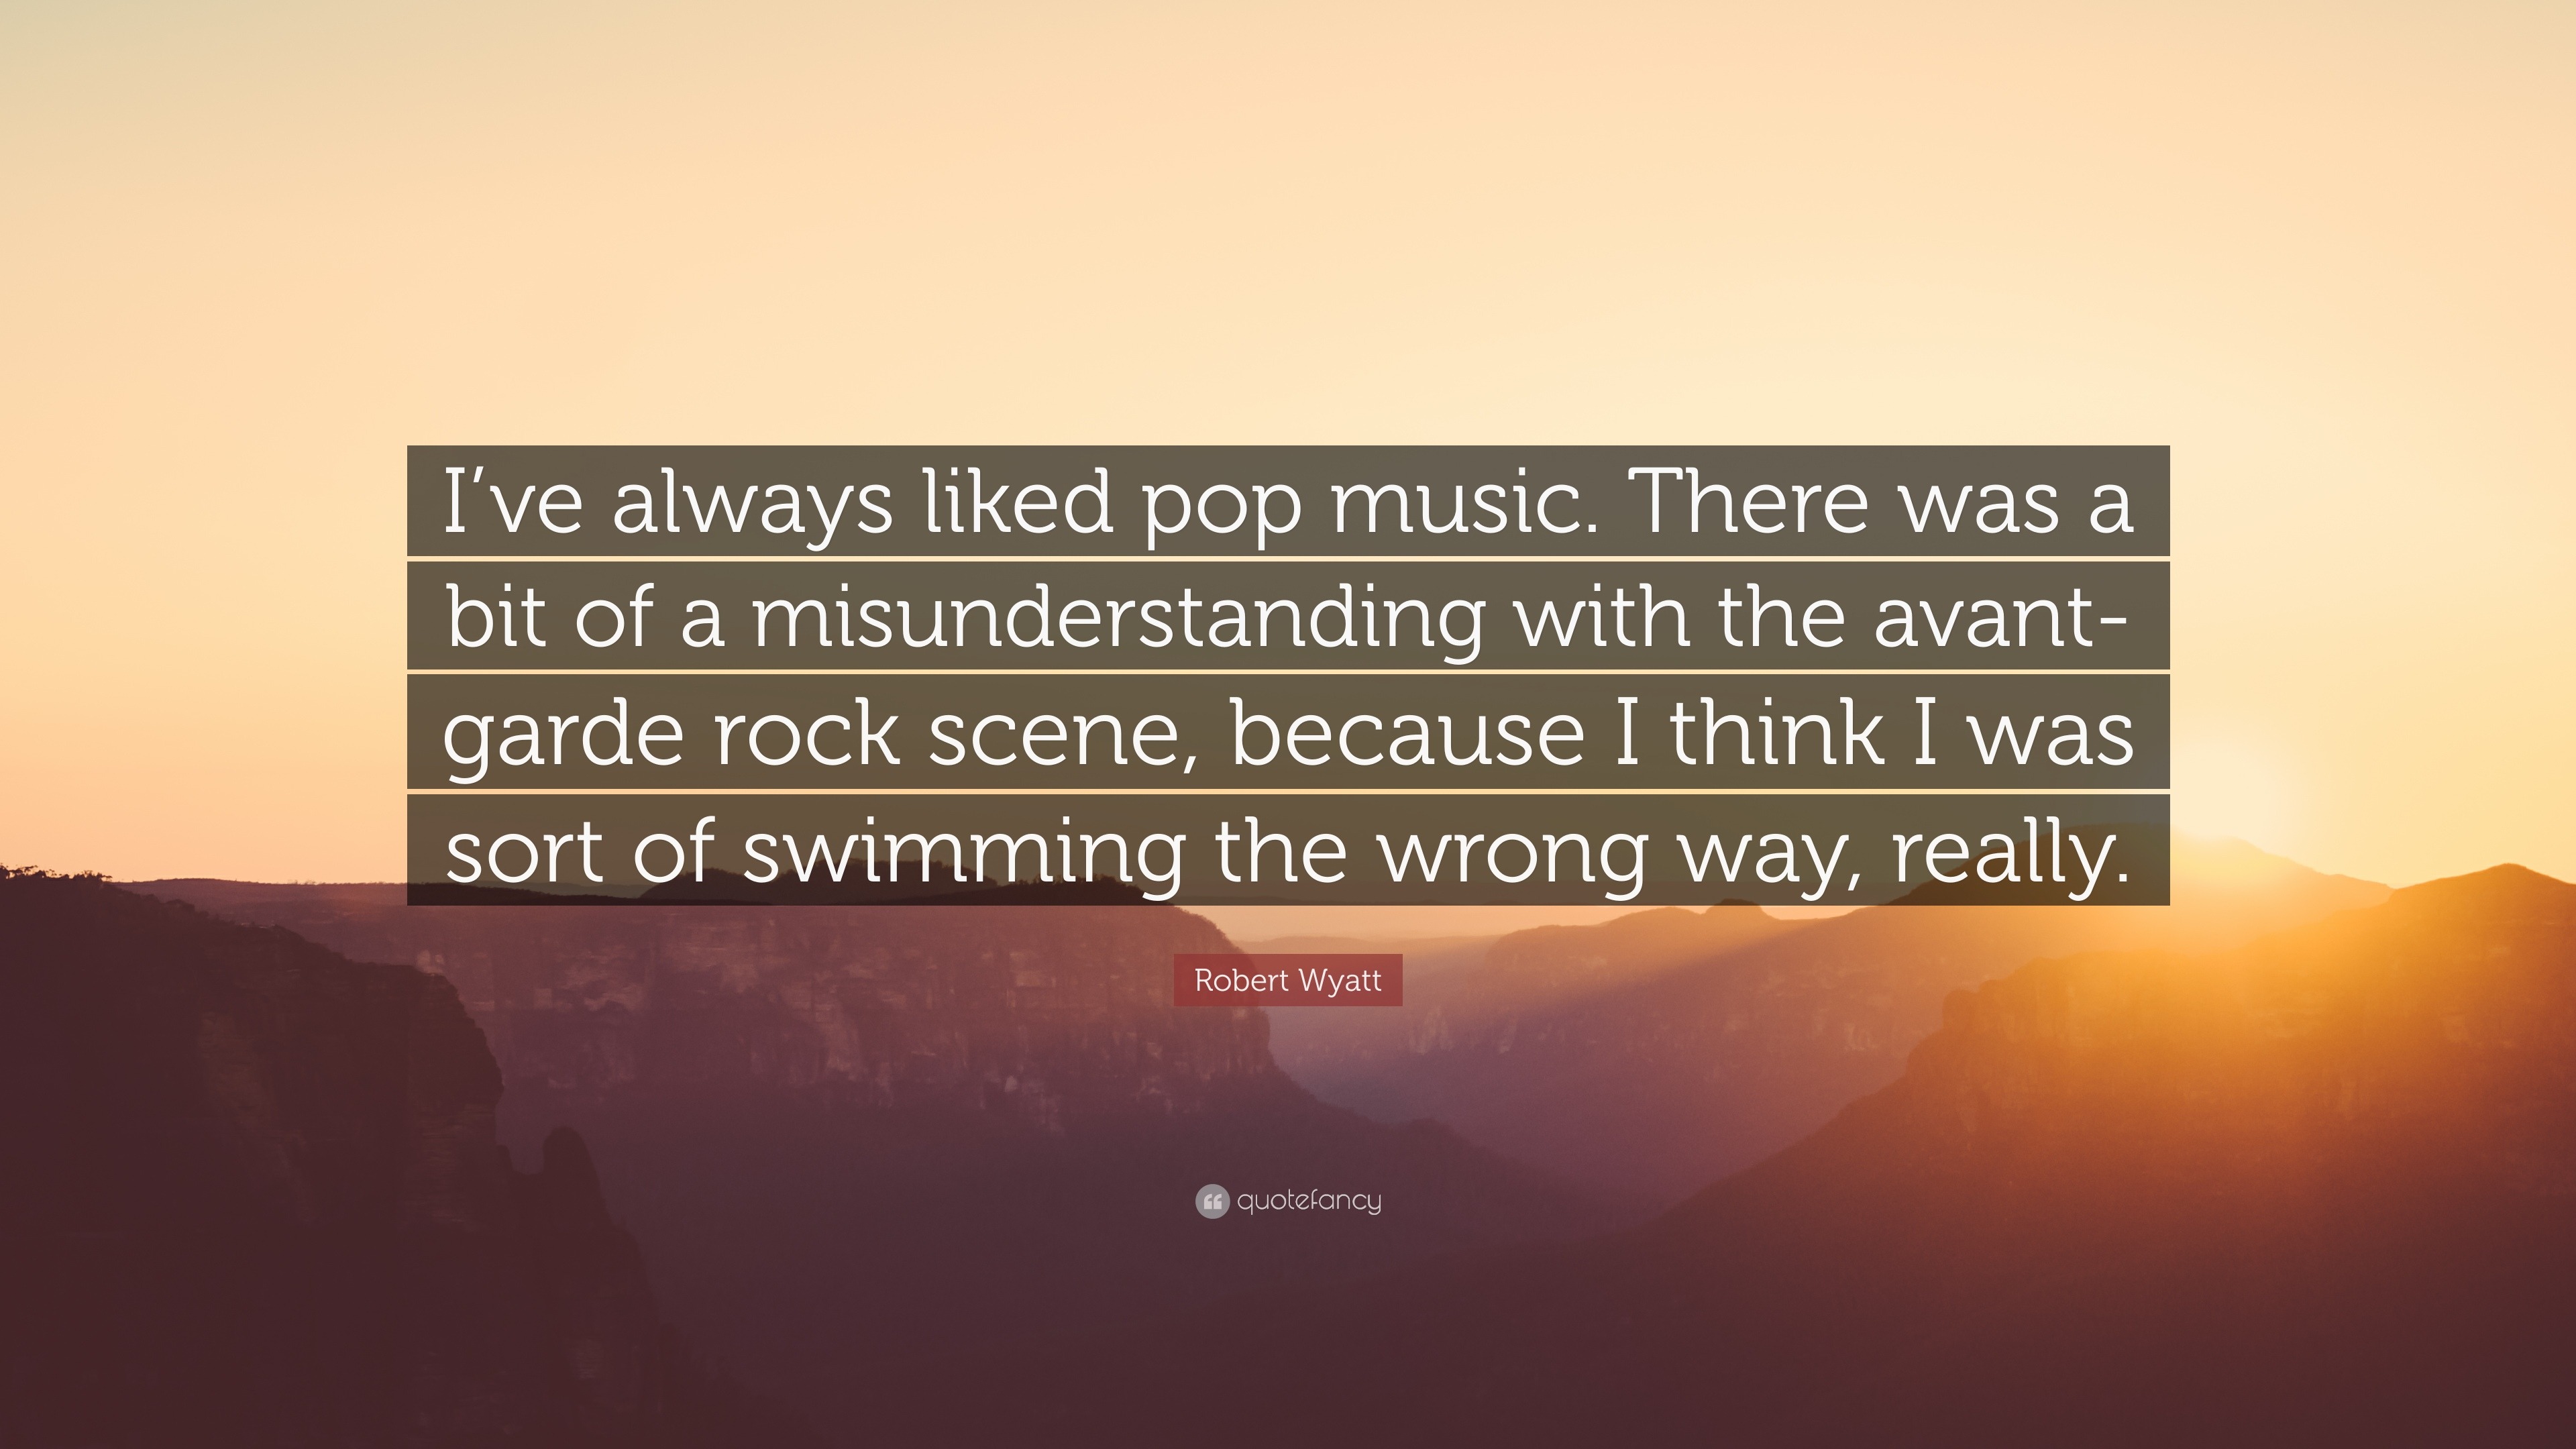 Robert Wyatt Quote: “I find it hard to take rock groups very